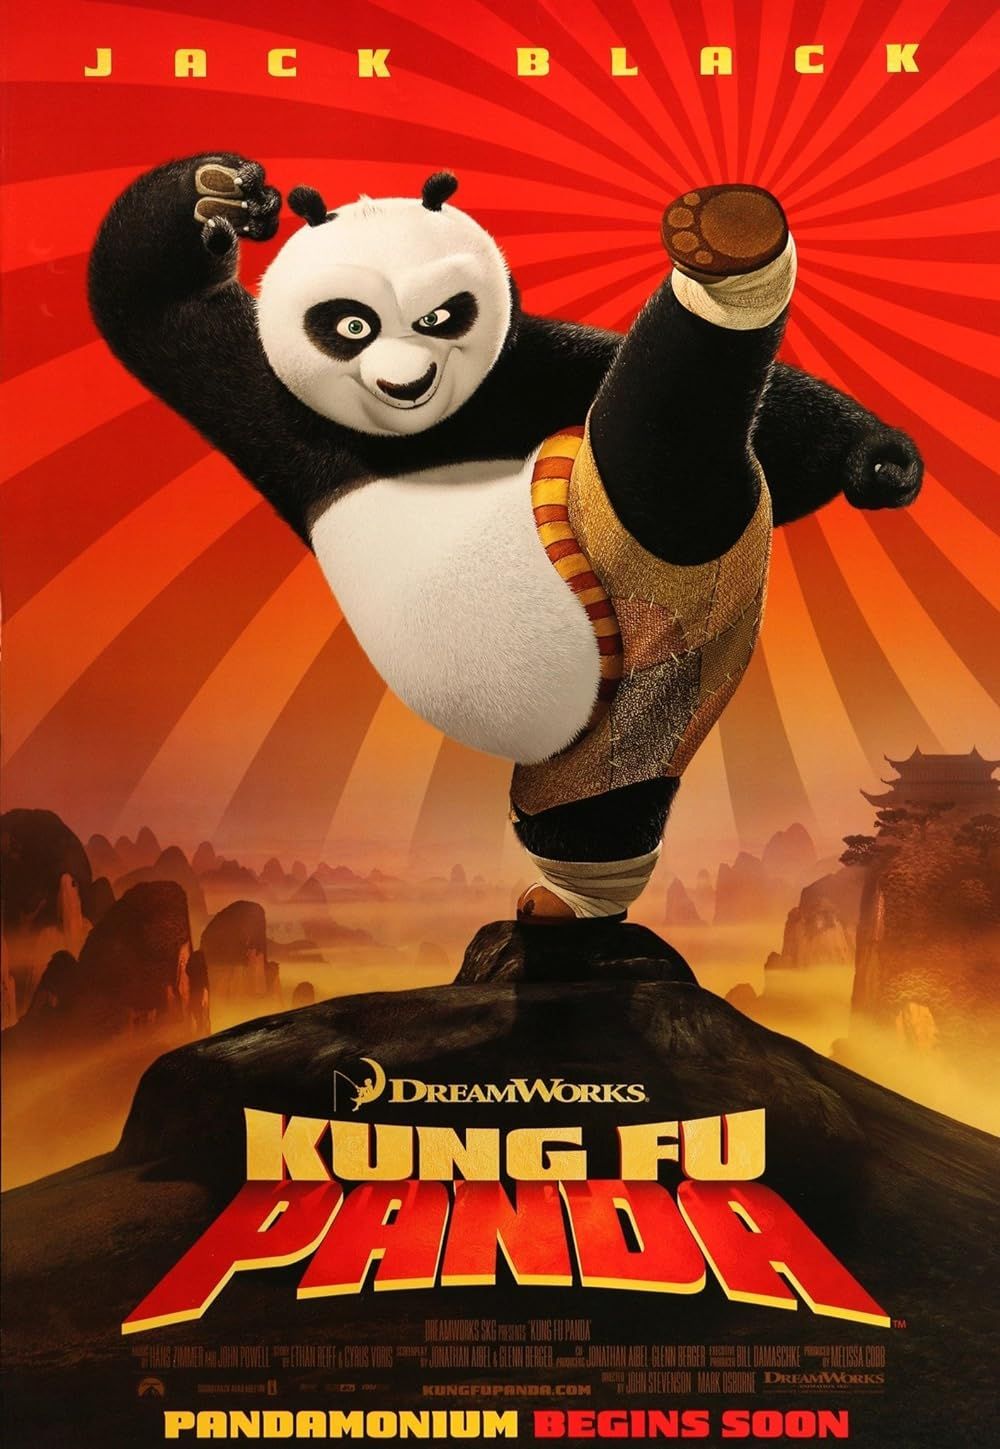 Poster for Kung Fu Panda by DreamWorks Animation showing the titular character doing martial arts